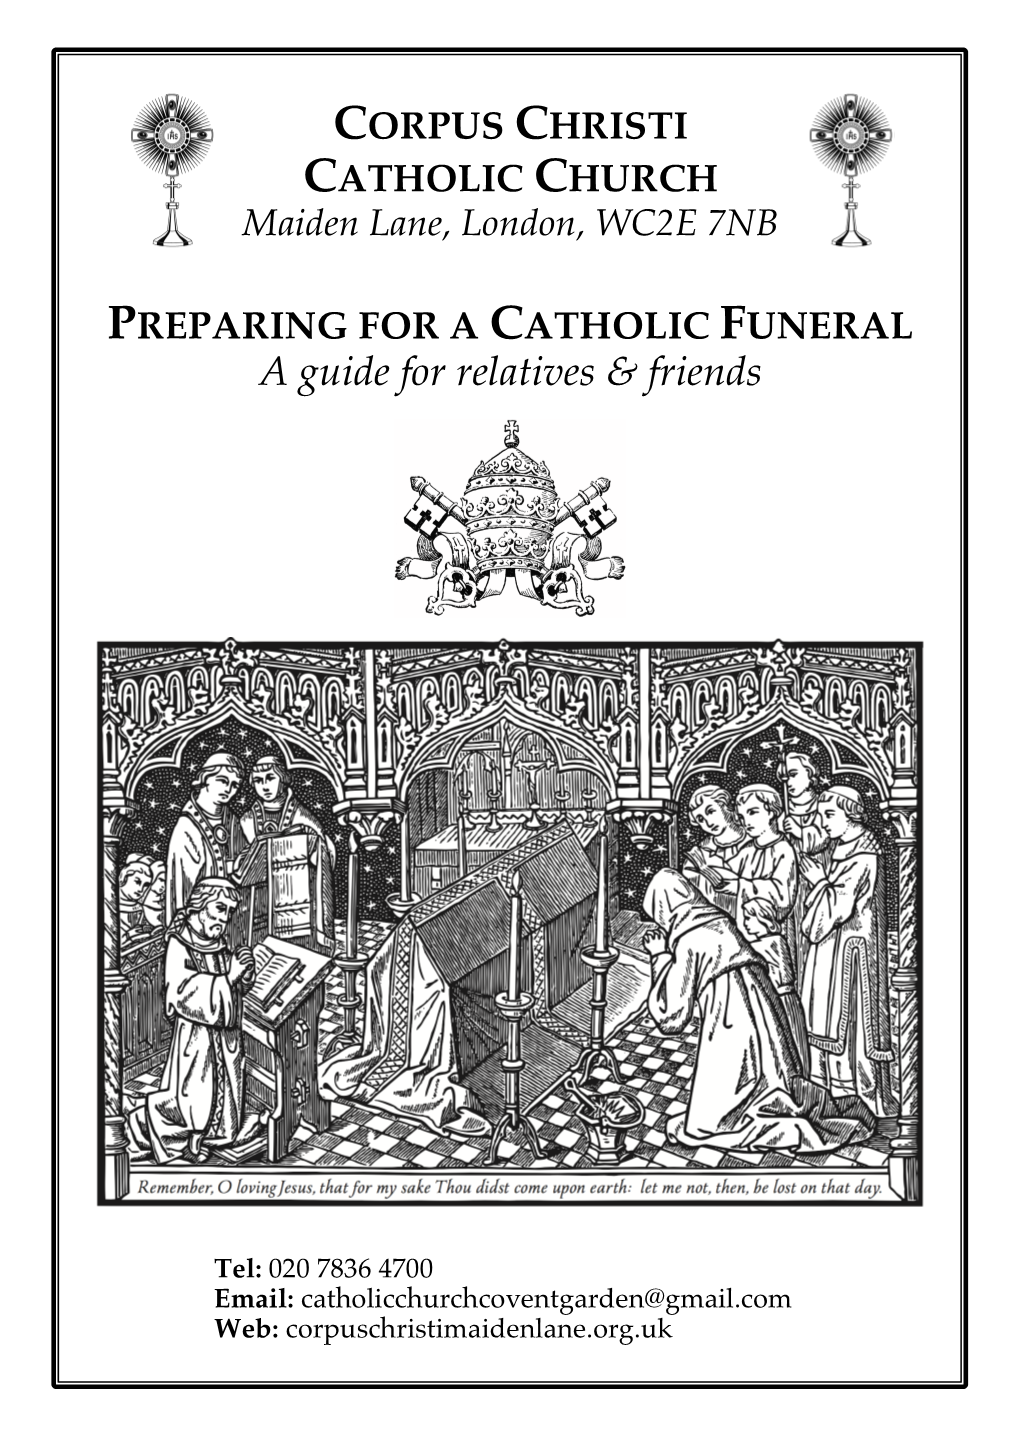 Download the Funeral Guide Here